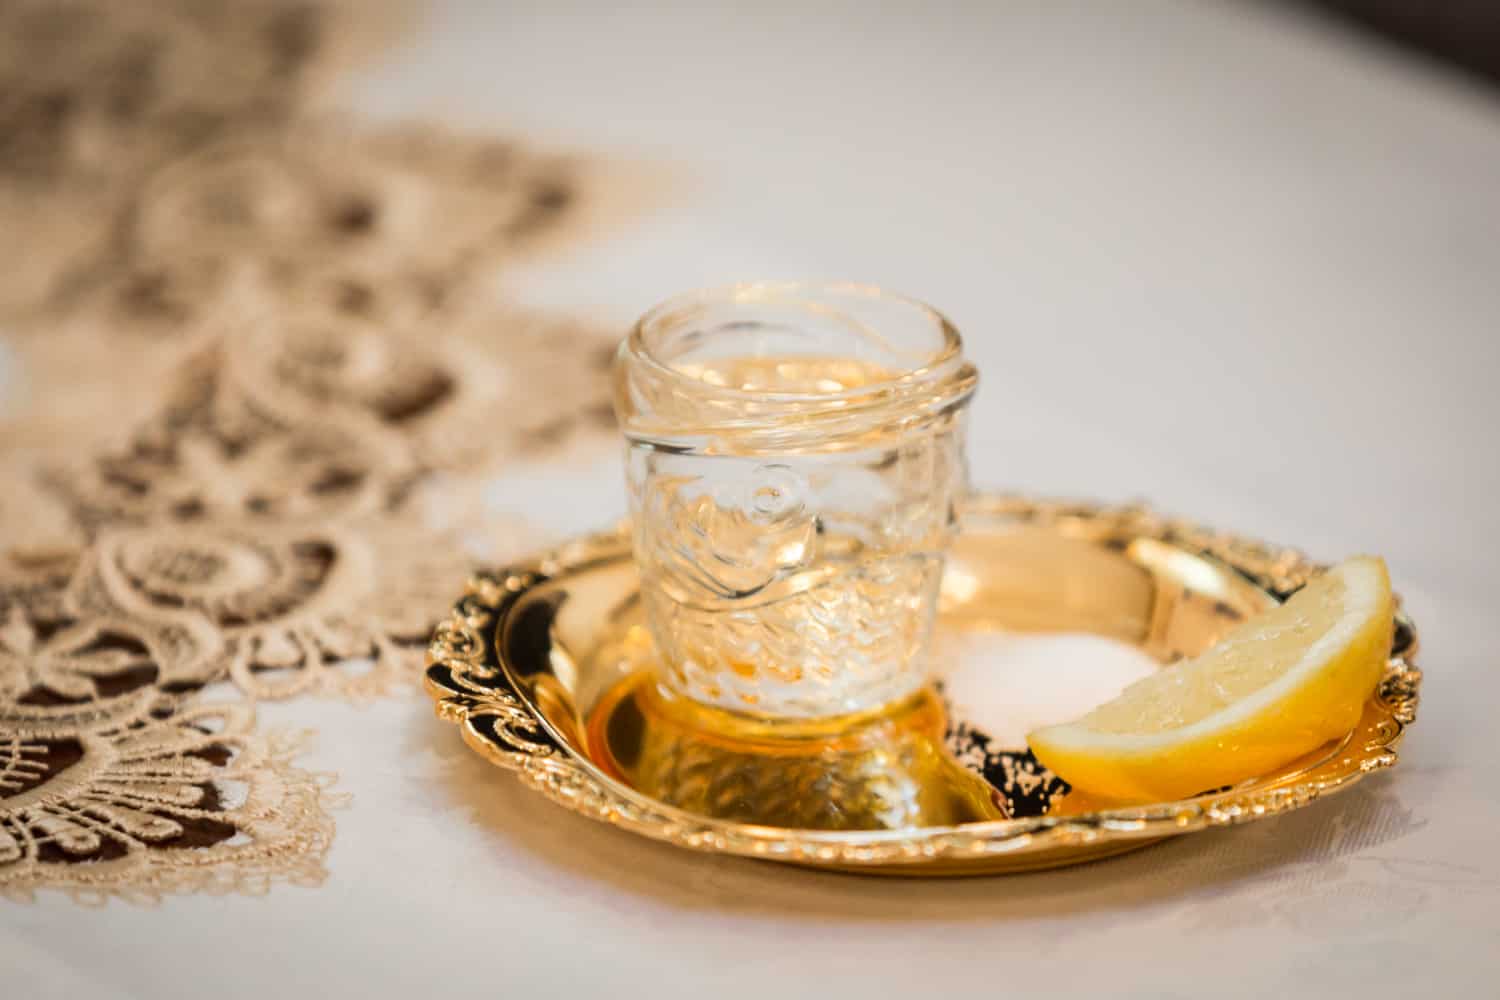 Gold plate with lemon slice and small jar of honey